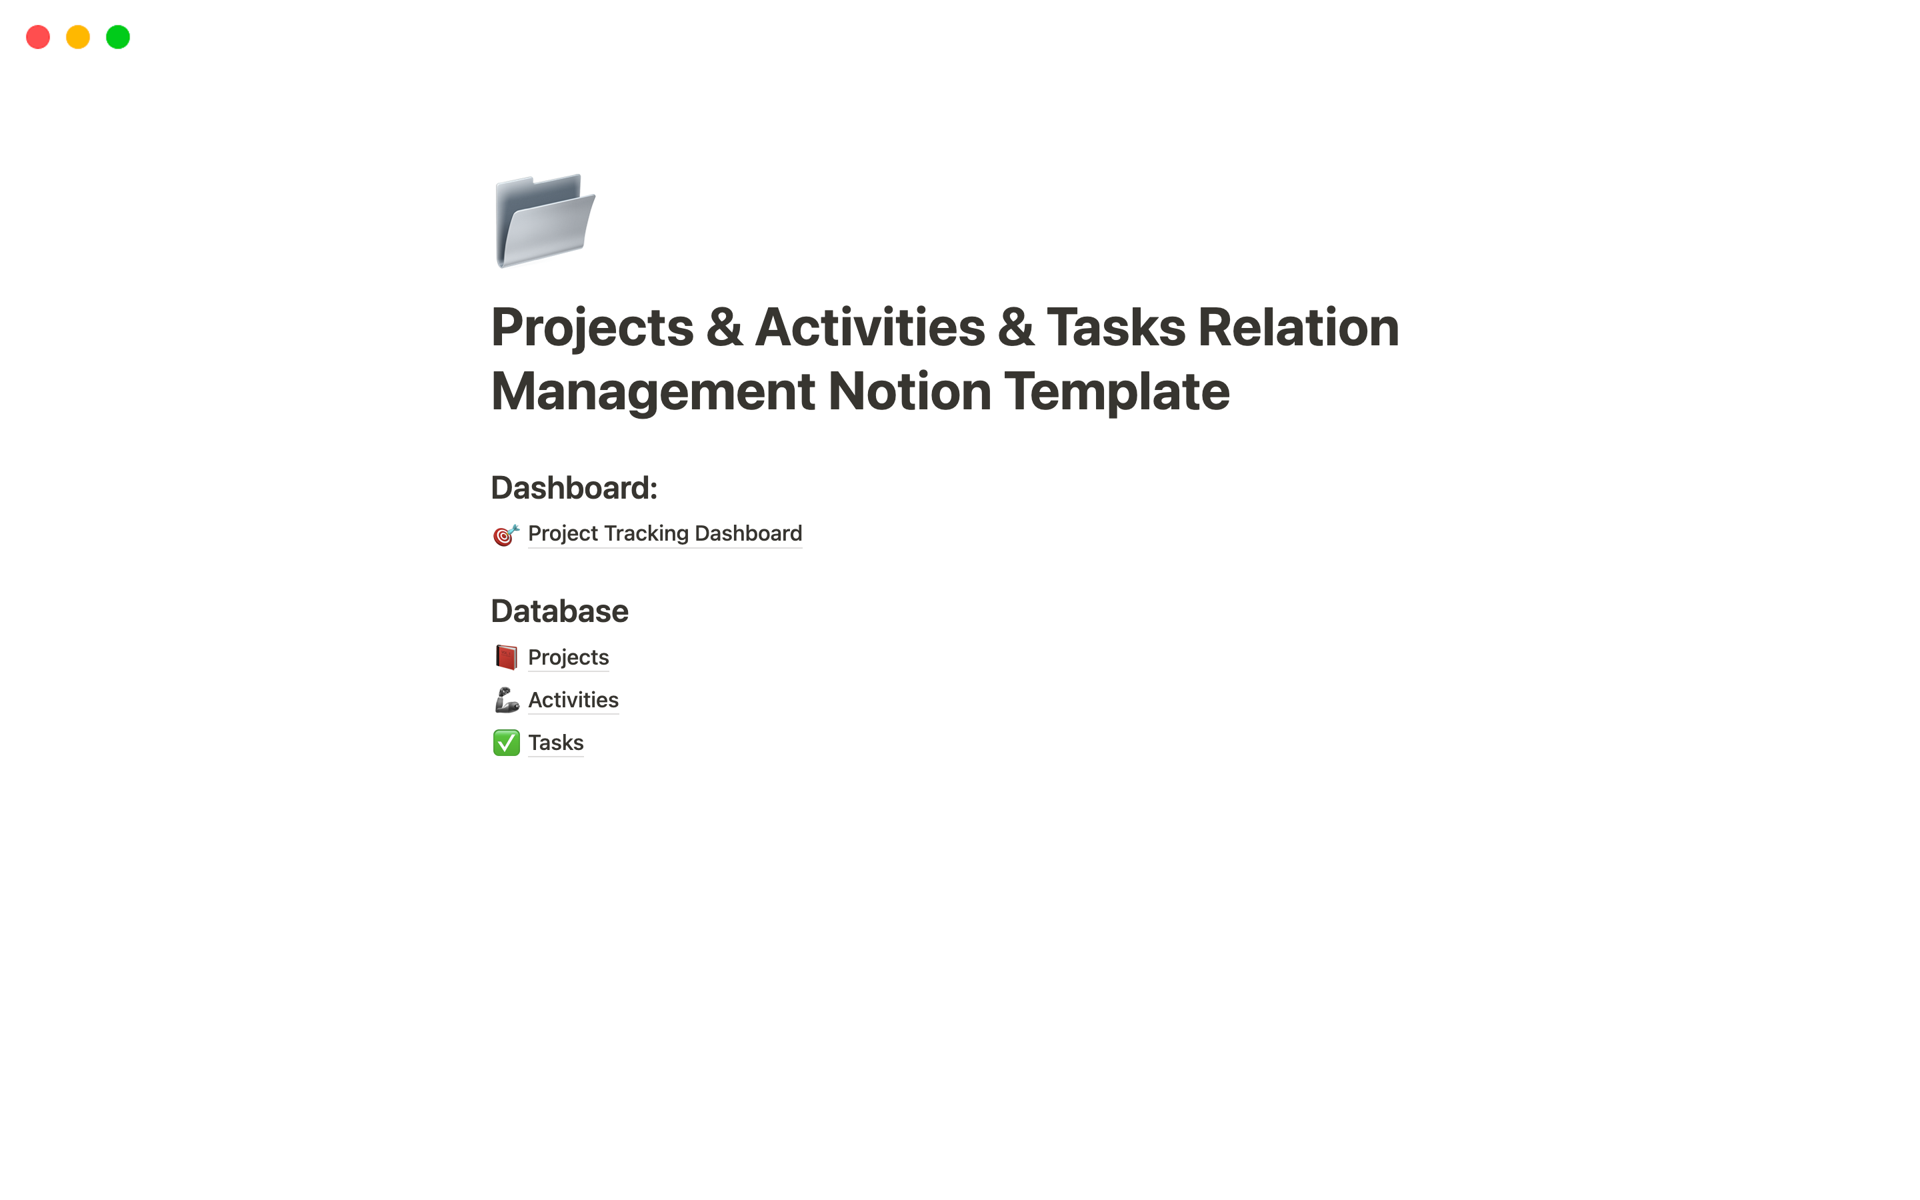 The 3-level project management Notion template you need as a freelancer, solopreneur or students